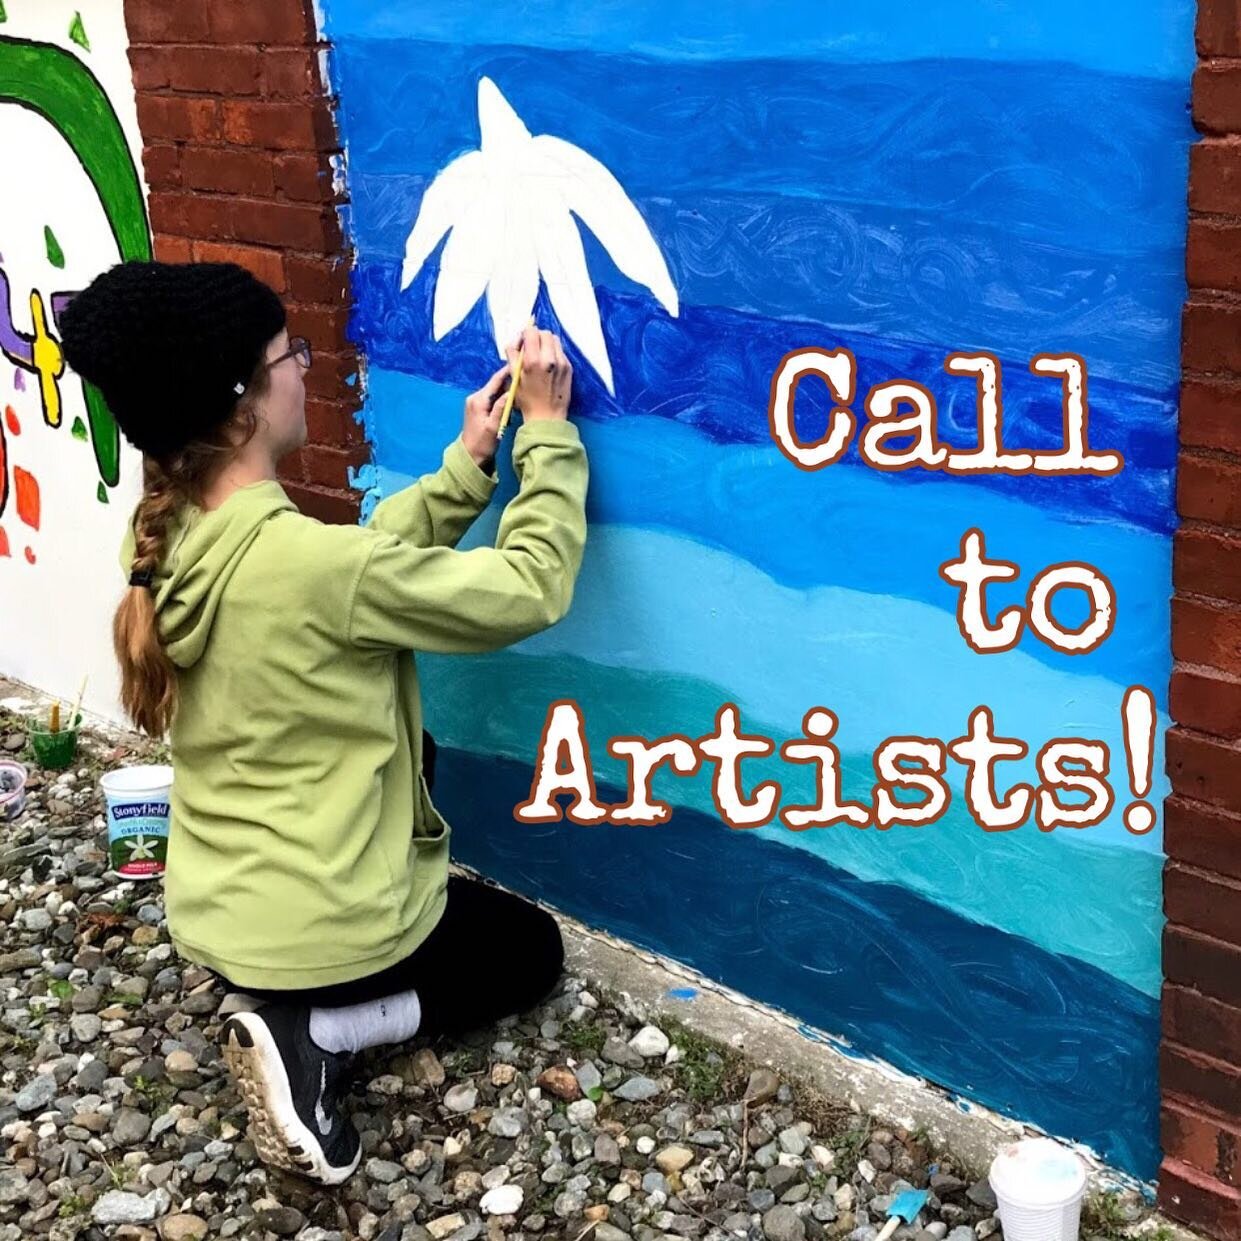 We&rsquo;re so excited to announce a call for proposals for the next generation of murals for the Richmond Town Center&rsquo;s boarded up windows! Looking for individuals and local groups who want to create something inspiring for our town. You do no